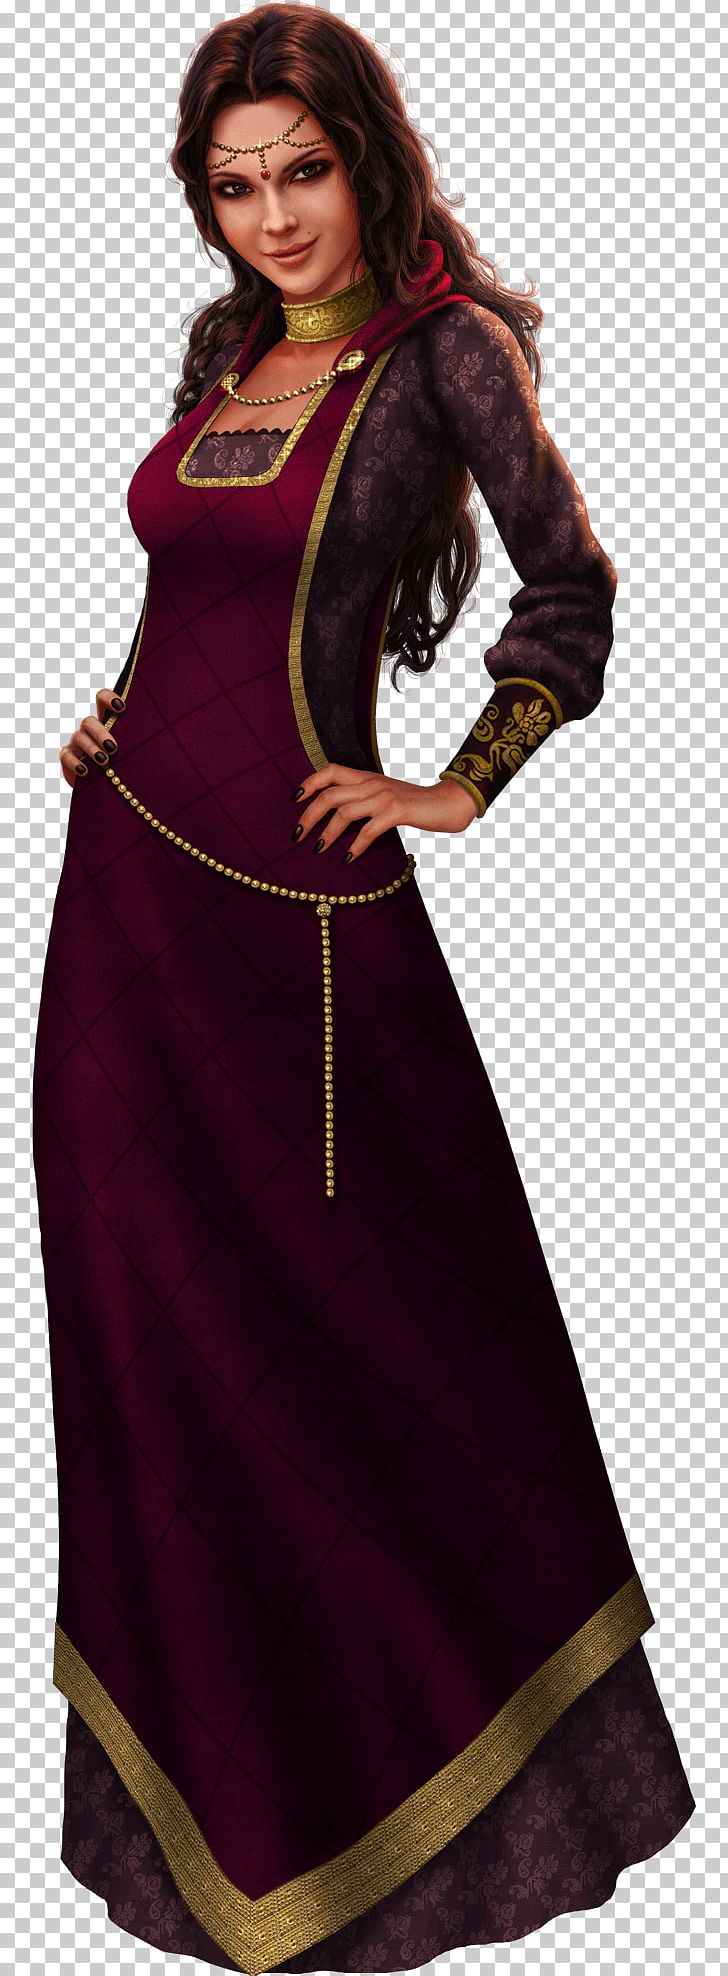 The Sims Medieval: Pirates And Nobles The Sims 3: Ambitions The Sims 2 The Sims 3: World Adventures The Sims 3: Seasons PNG, Clipart, Costume, Costume Design, Electronic Arts, Magenta, Middle Ages Free PNG Download